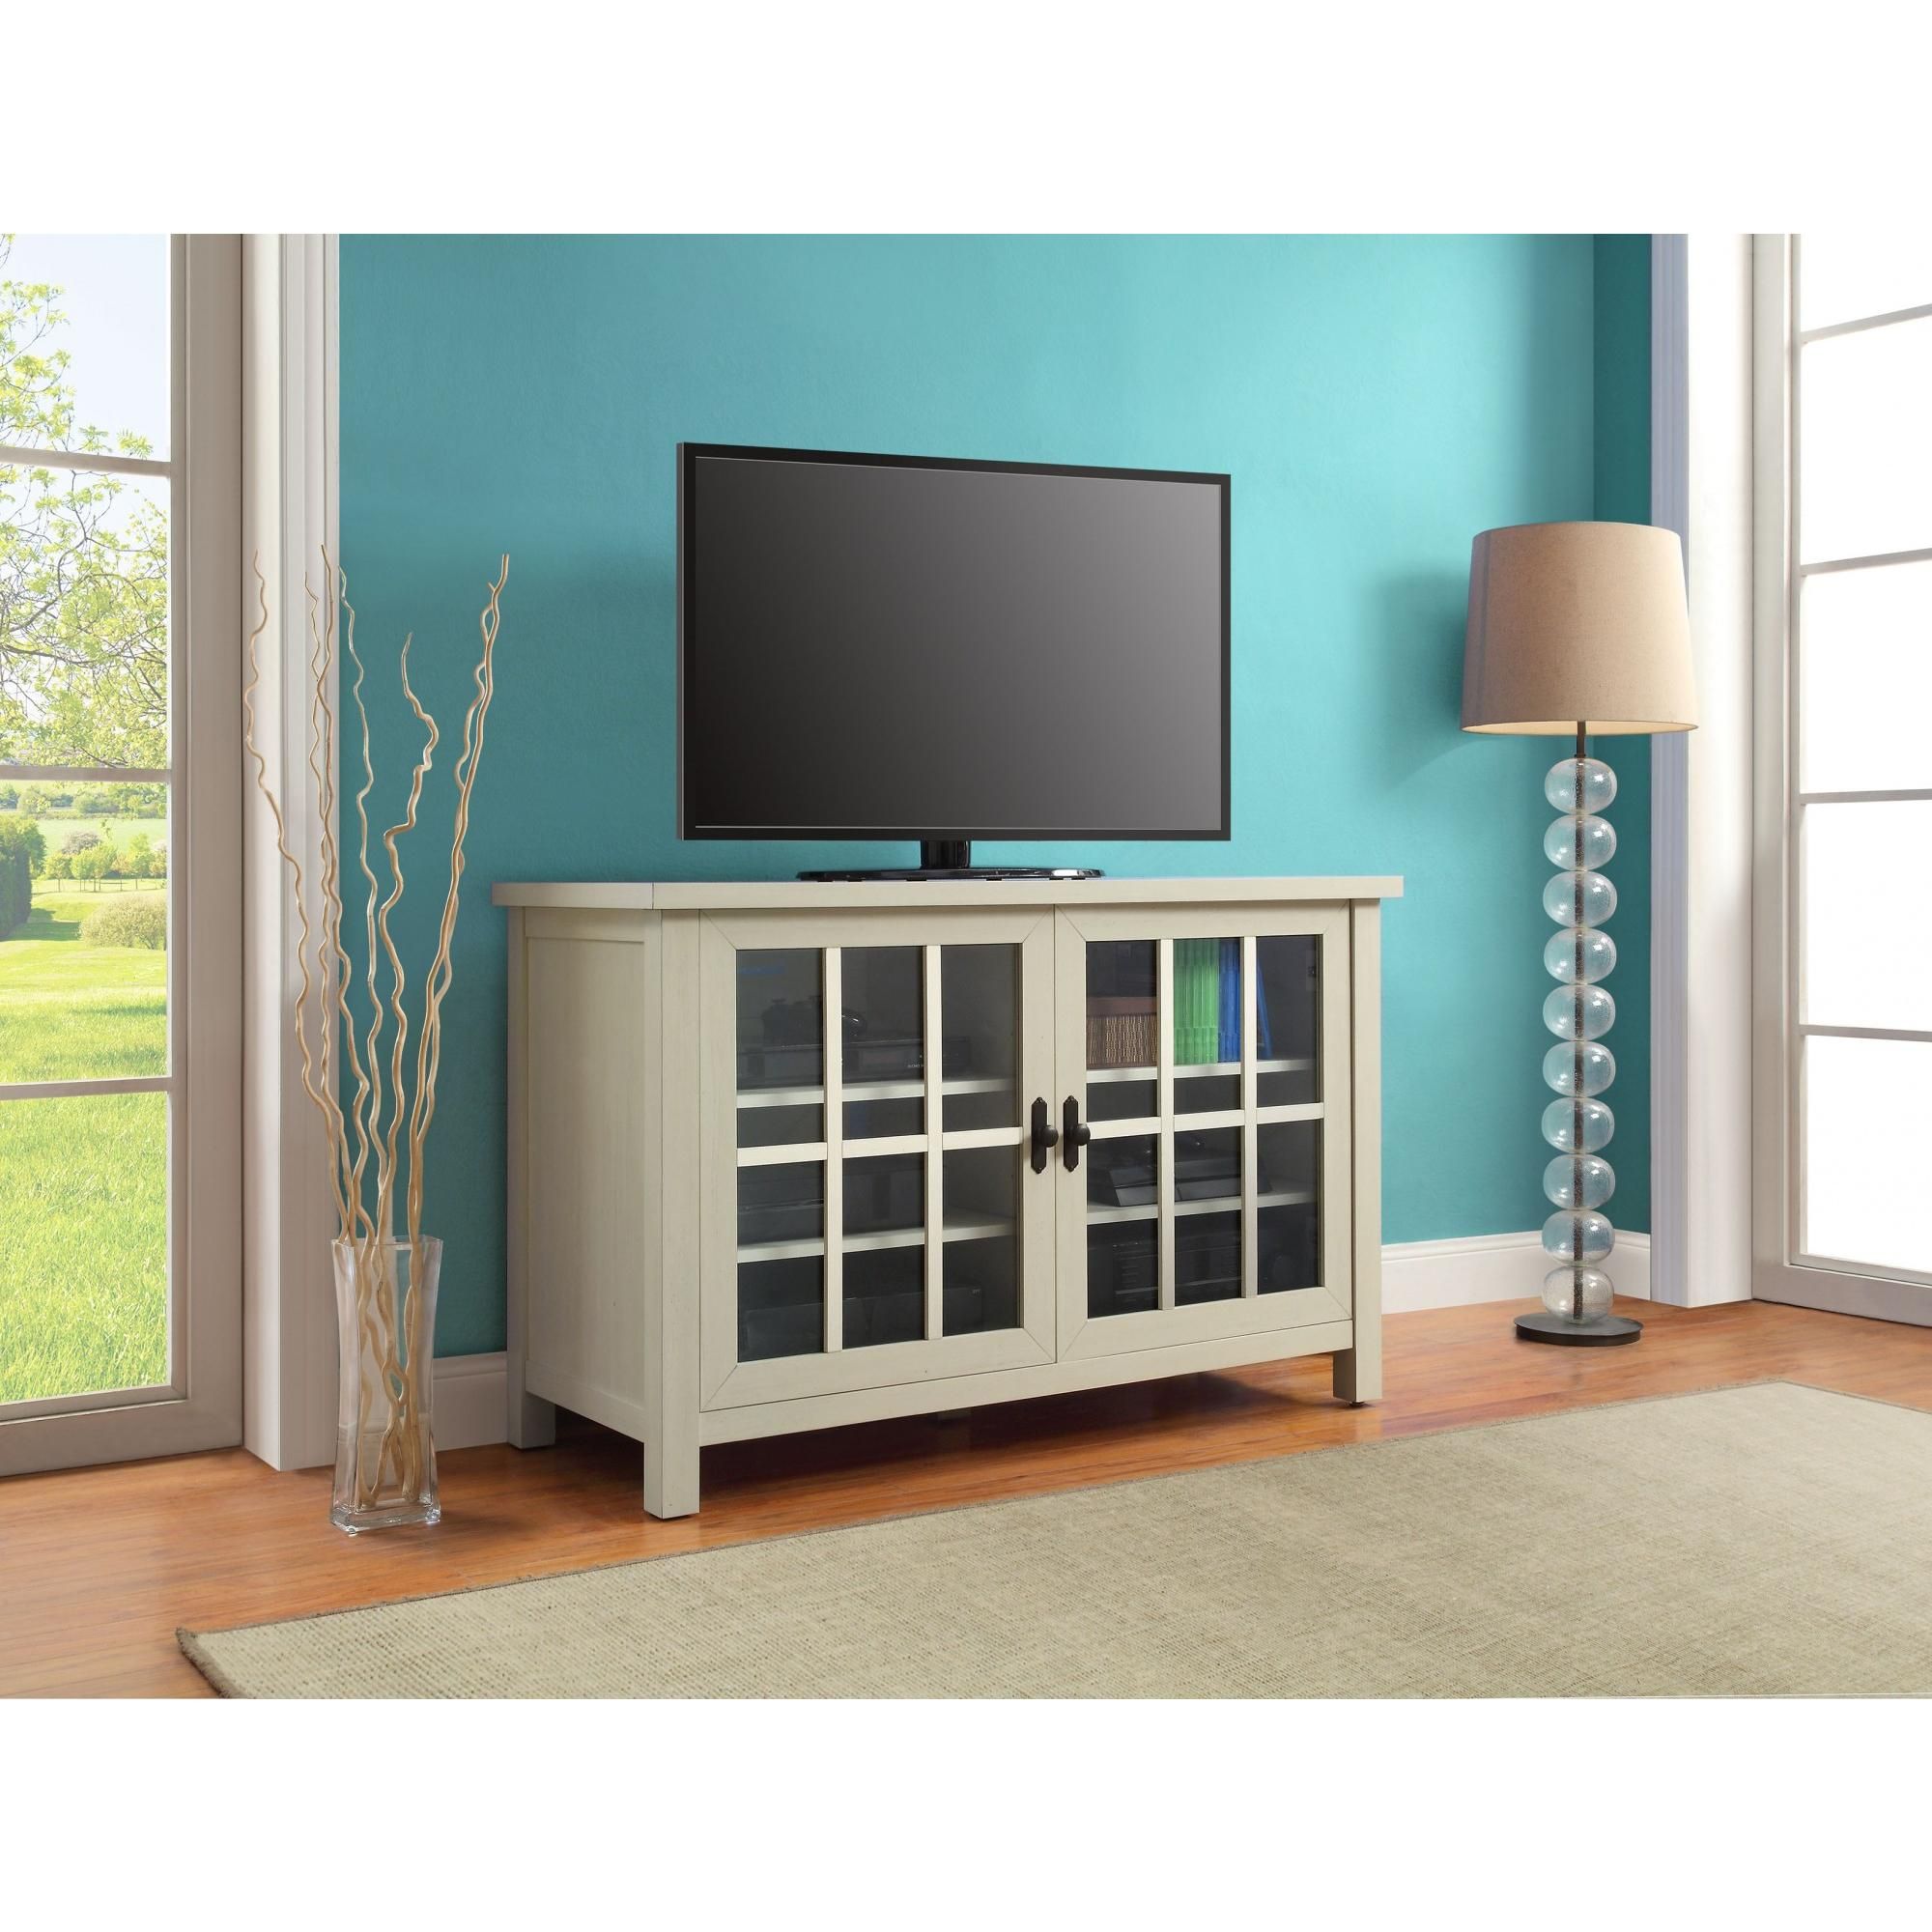 Better Homes And Gardens Oxford Square Tv Console For Tvs Up To 55 Intended For Oxford 60 Inch Tv Stands (View 10 of 30)